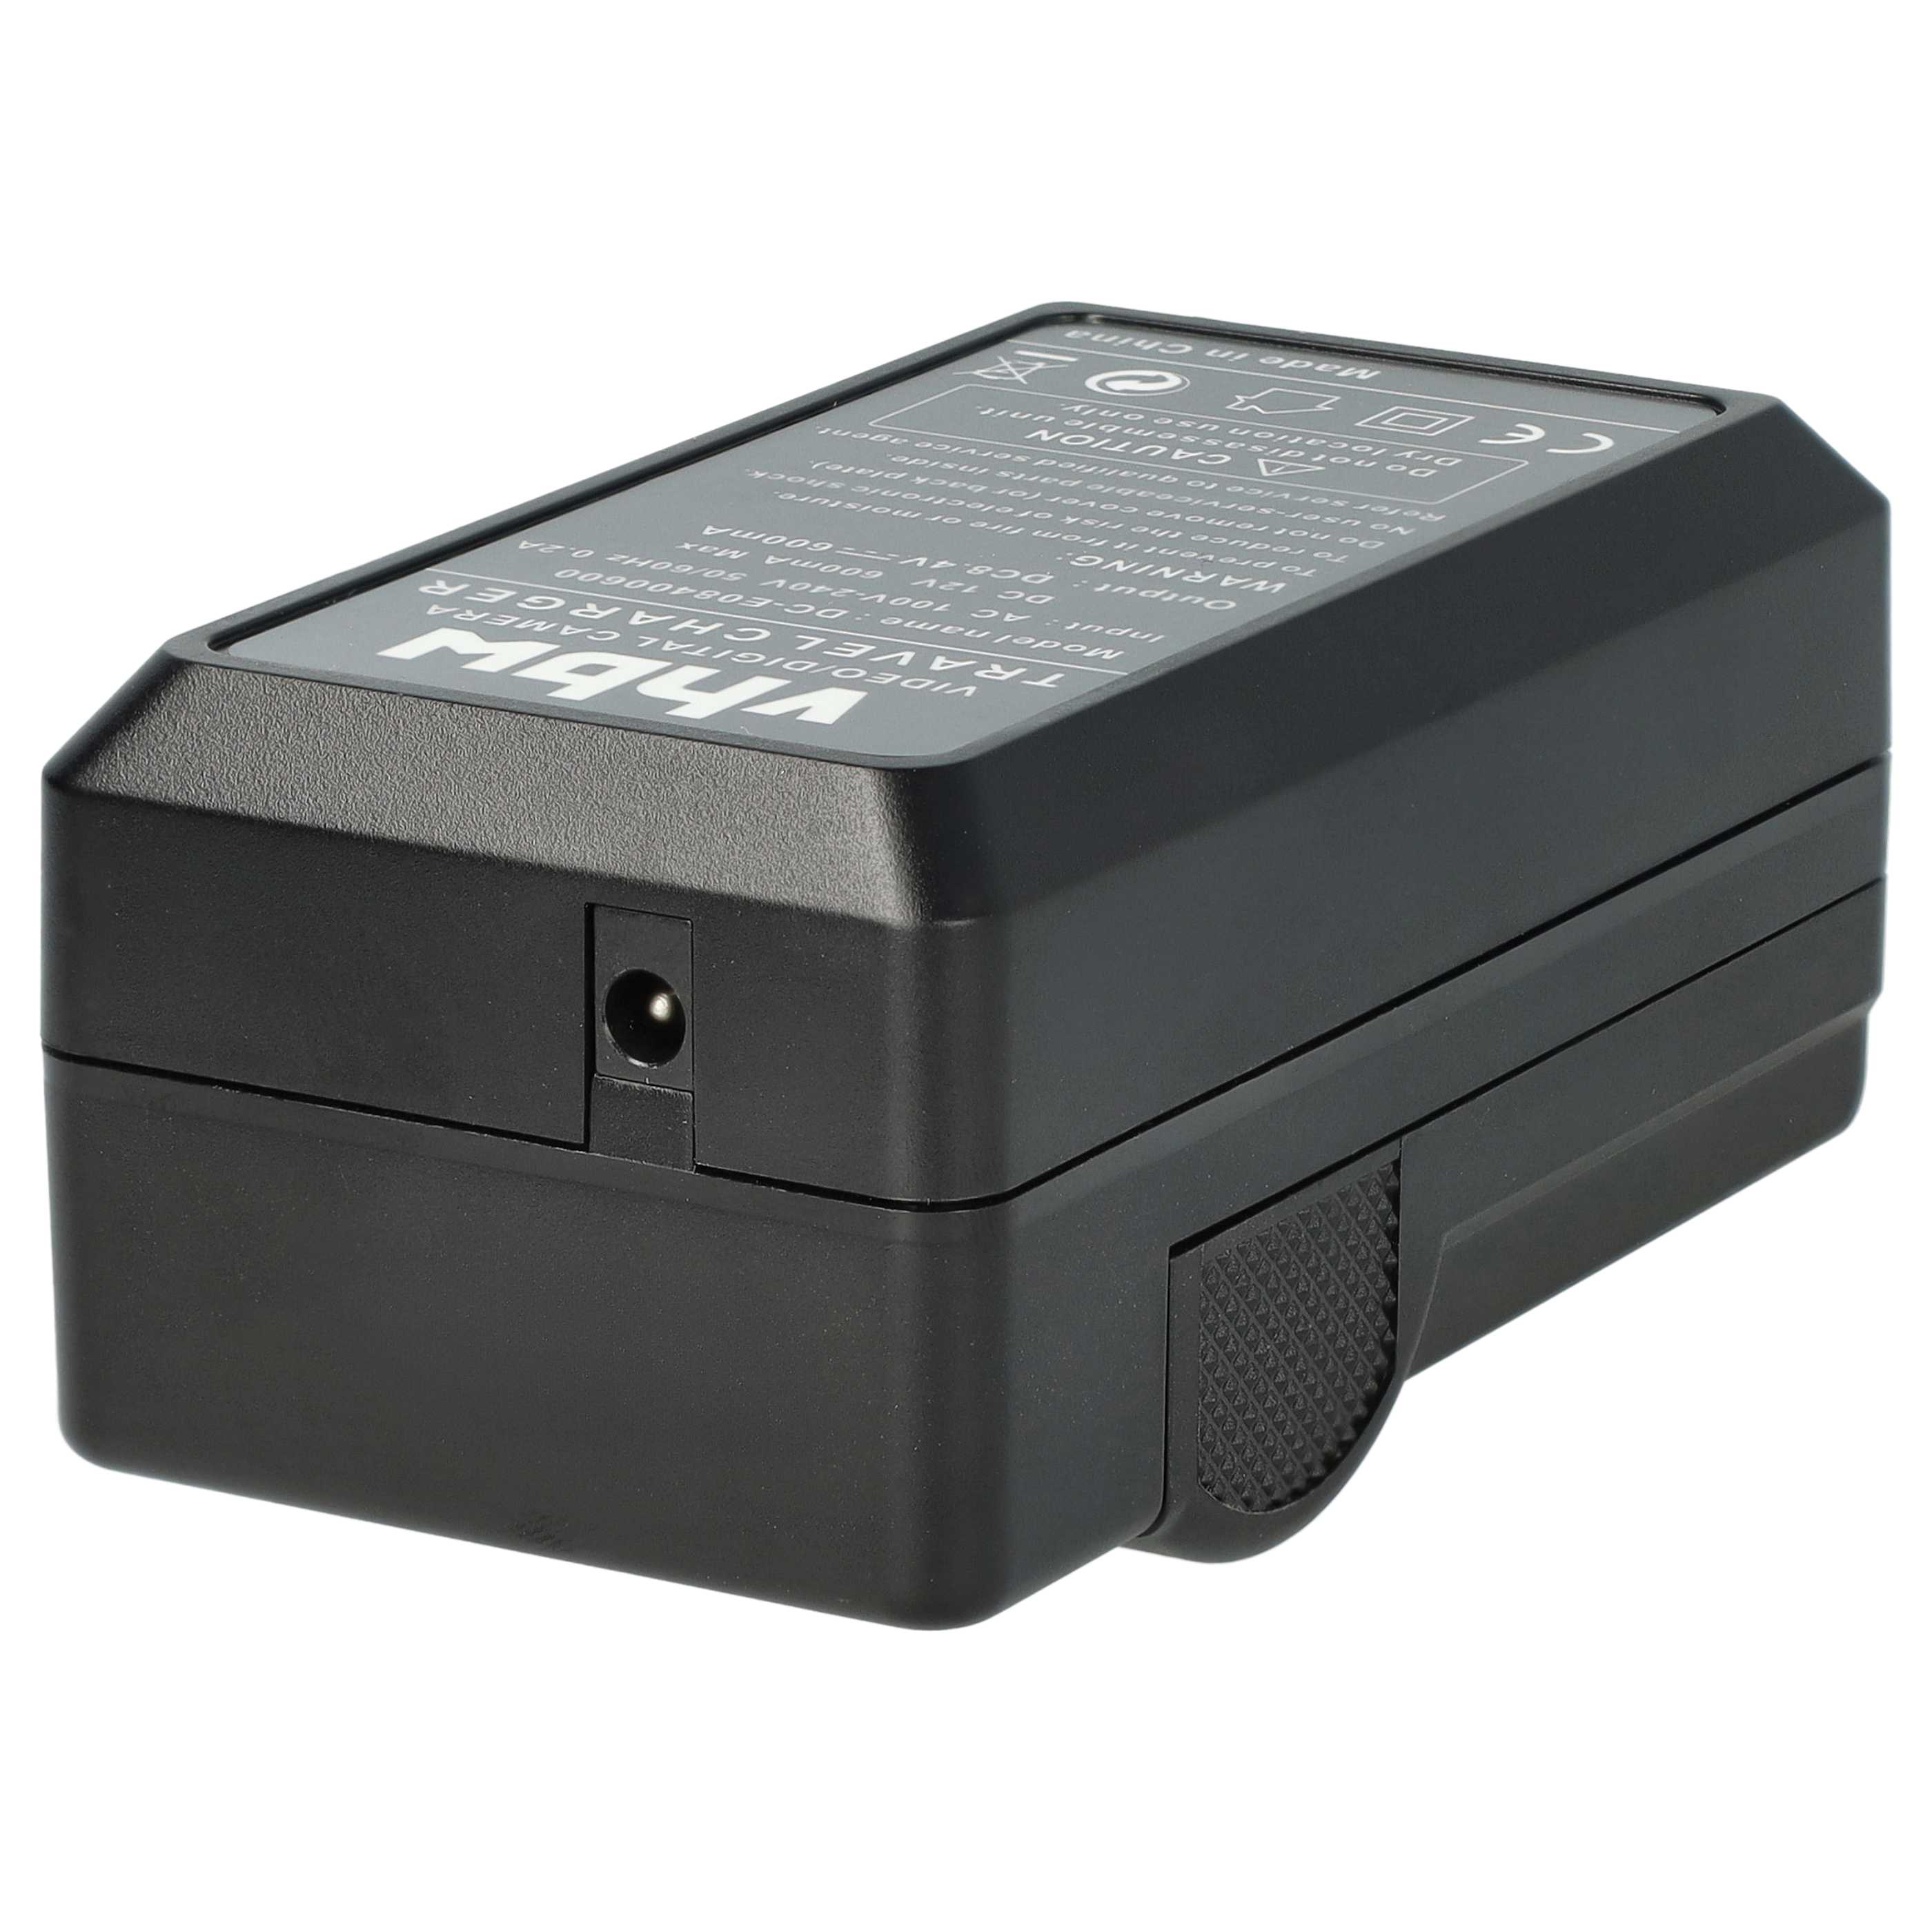 Battery Charger suitable for Canon BP-808 Camera etc. - 0.6 A, 8.4 V